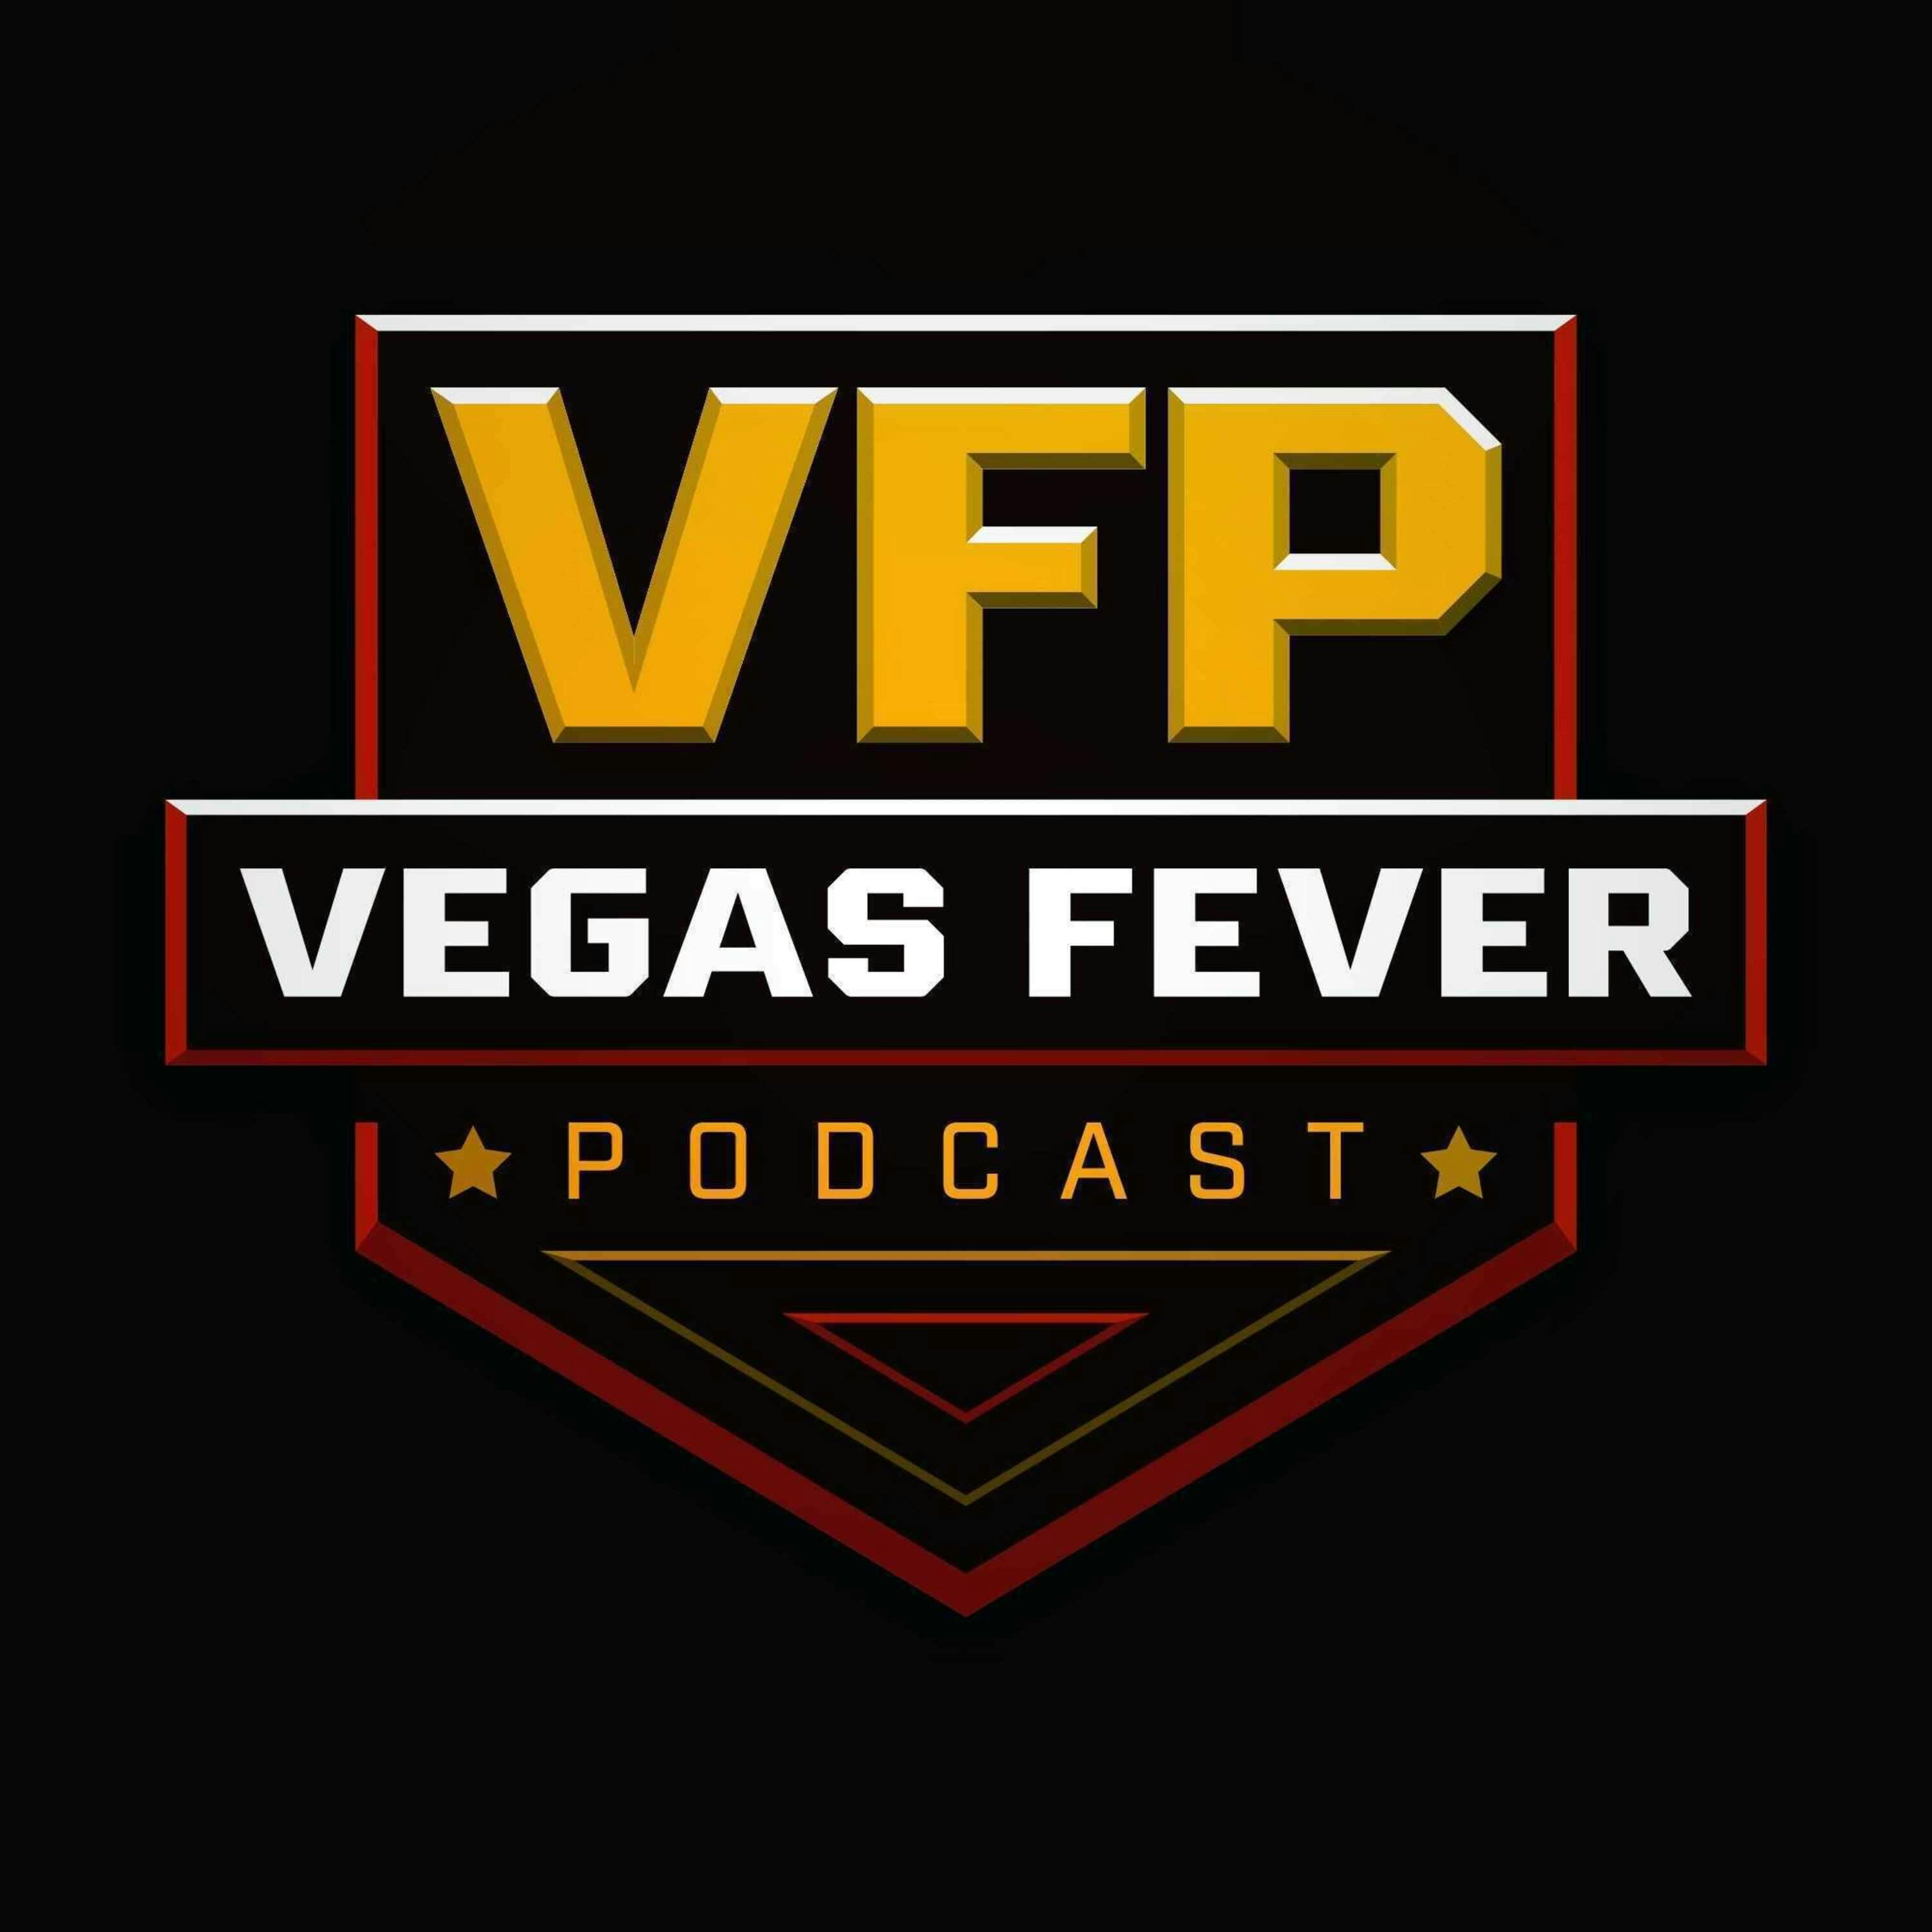 A big road trip for the VGK,UNLV's underachieving conference season& a big MLS to Vegas announcement